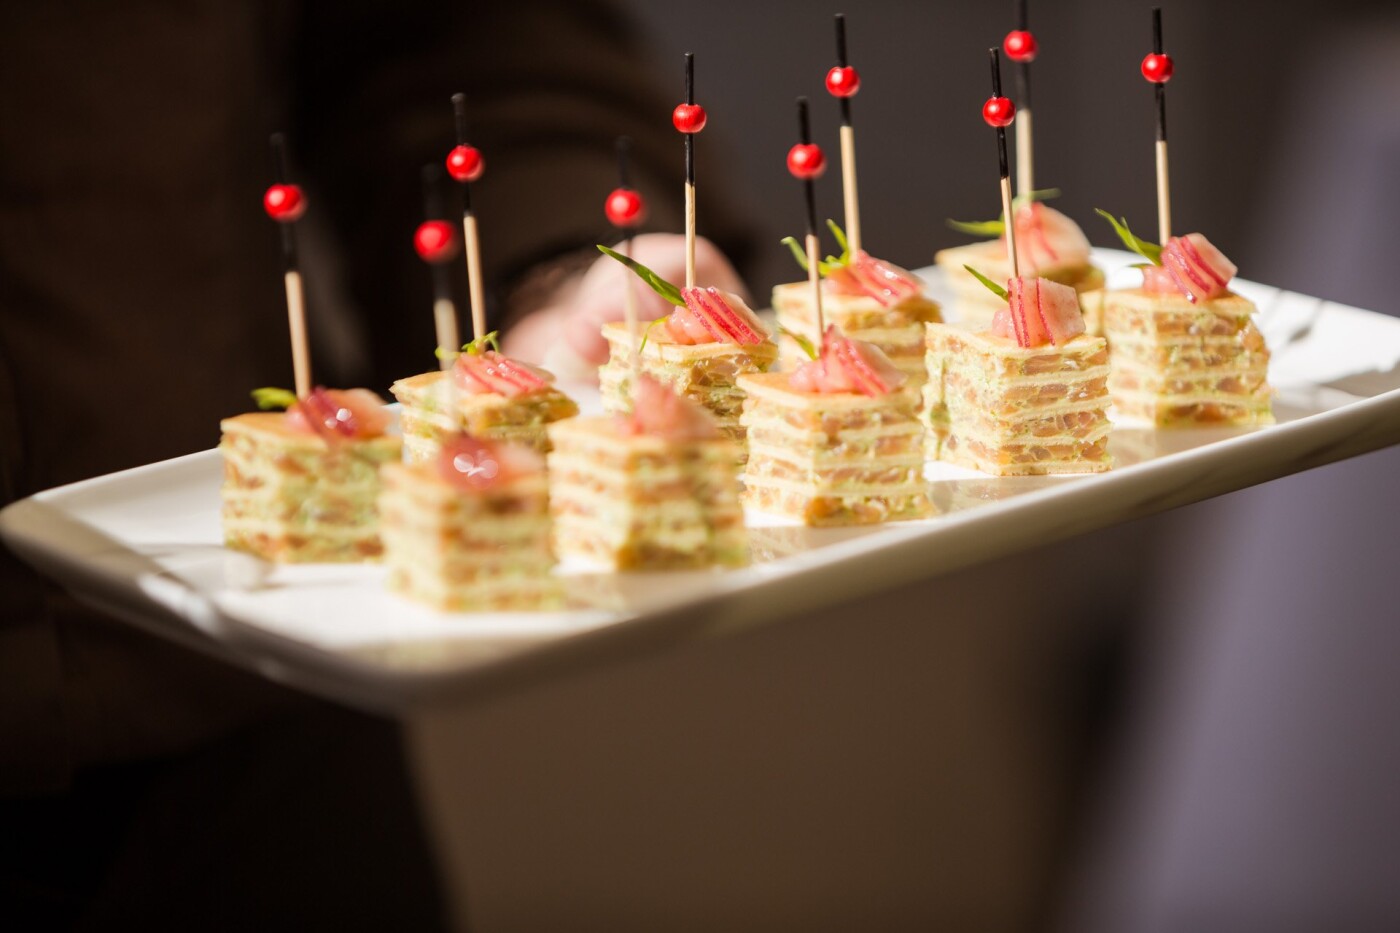 These canapés are consisting of pancakes and salmon and were served at cocktail hour on a wedding day at The Dolder Grand hotel in Zurich, Switzerland.